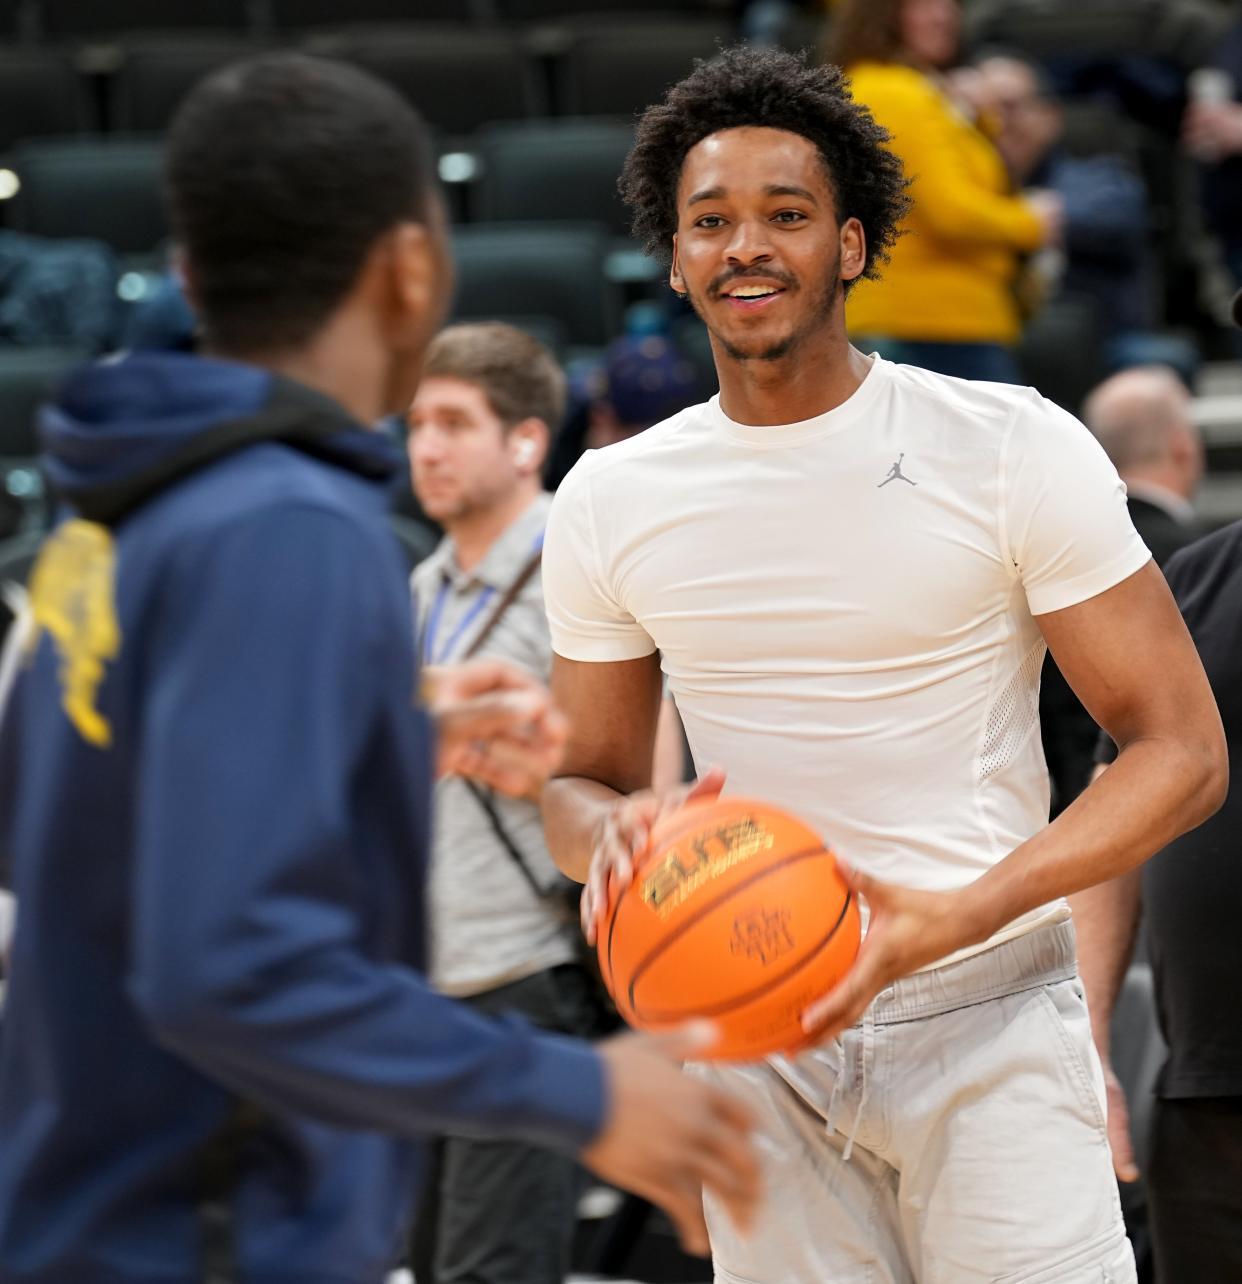 Emarion Ellis played in 14 games as a freshman at Marquette but missed this season after knee surgery.